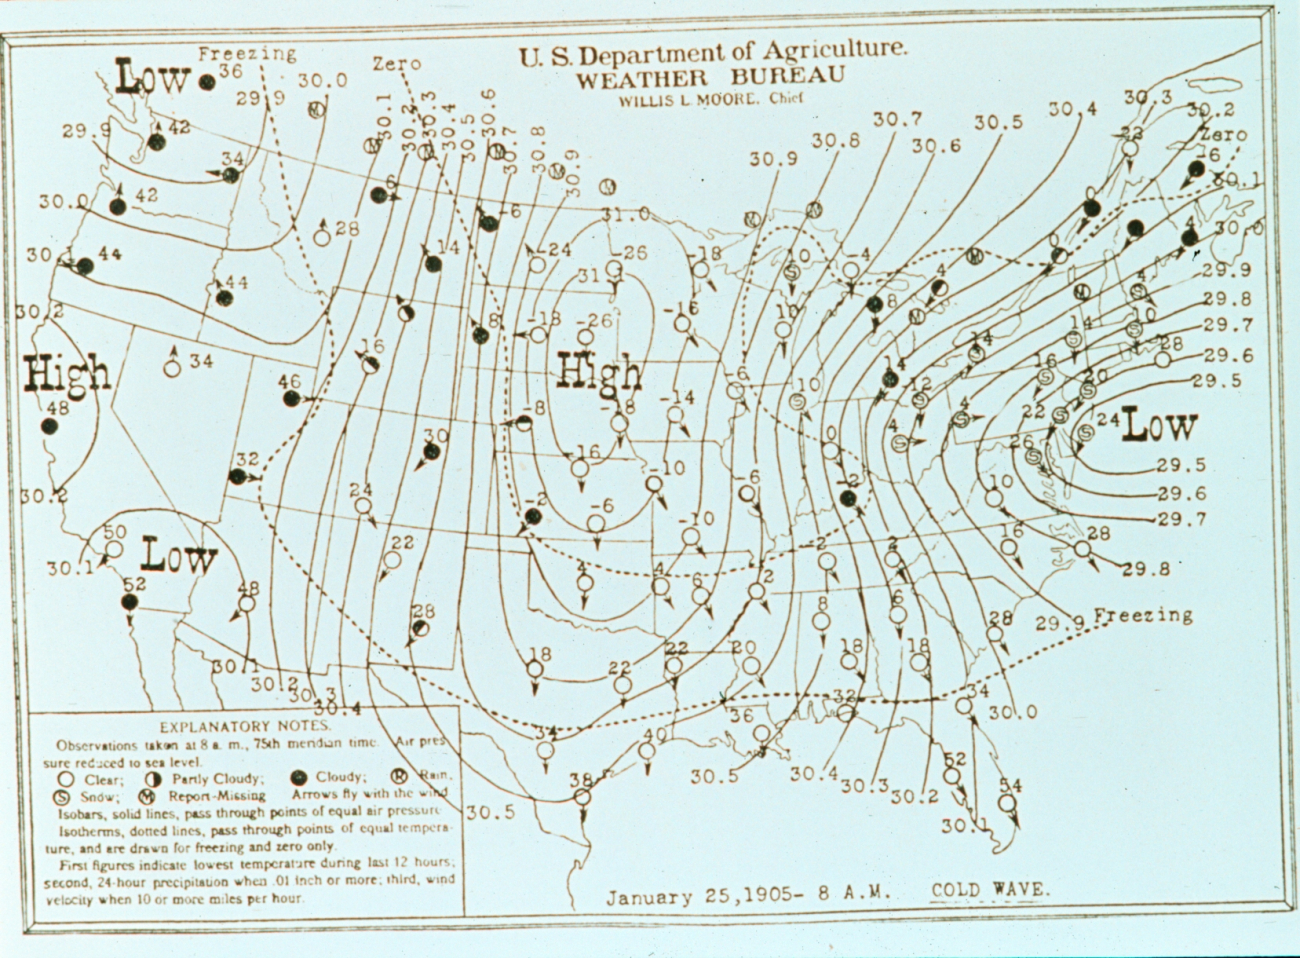 Weather Bureau weather map showing cold wave in center of countryNortheaster attacking mid-Atlantic states